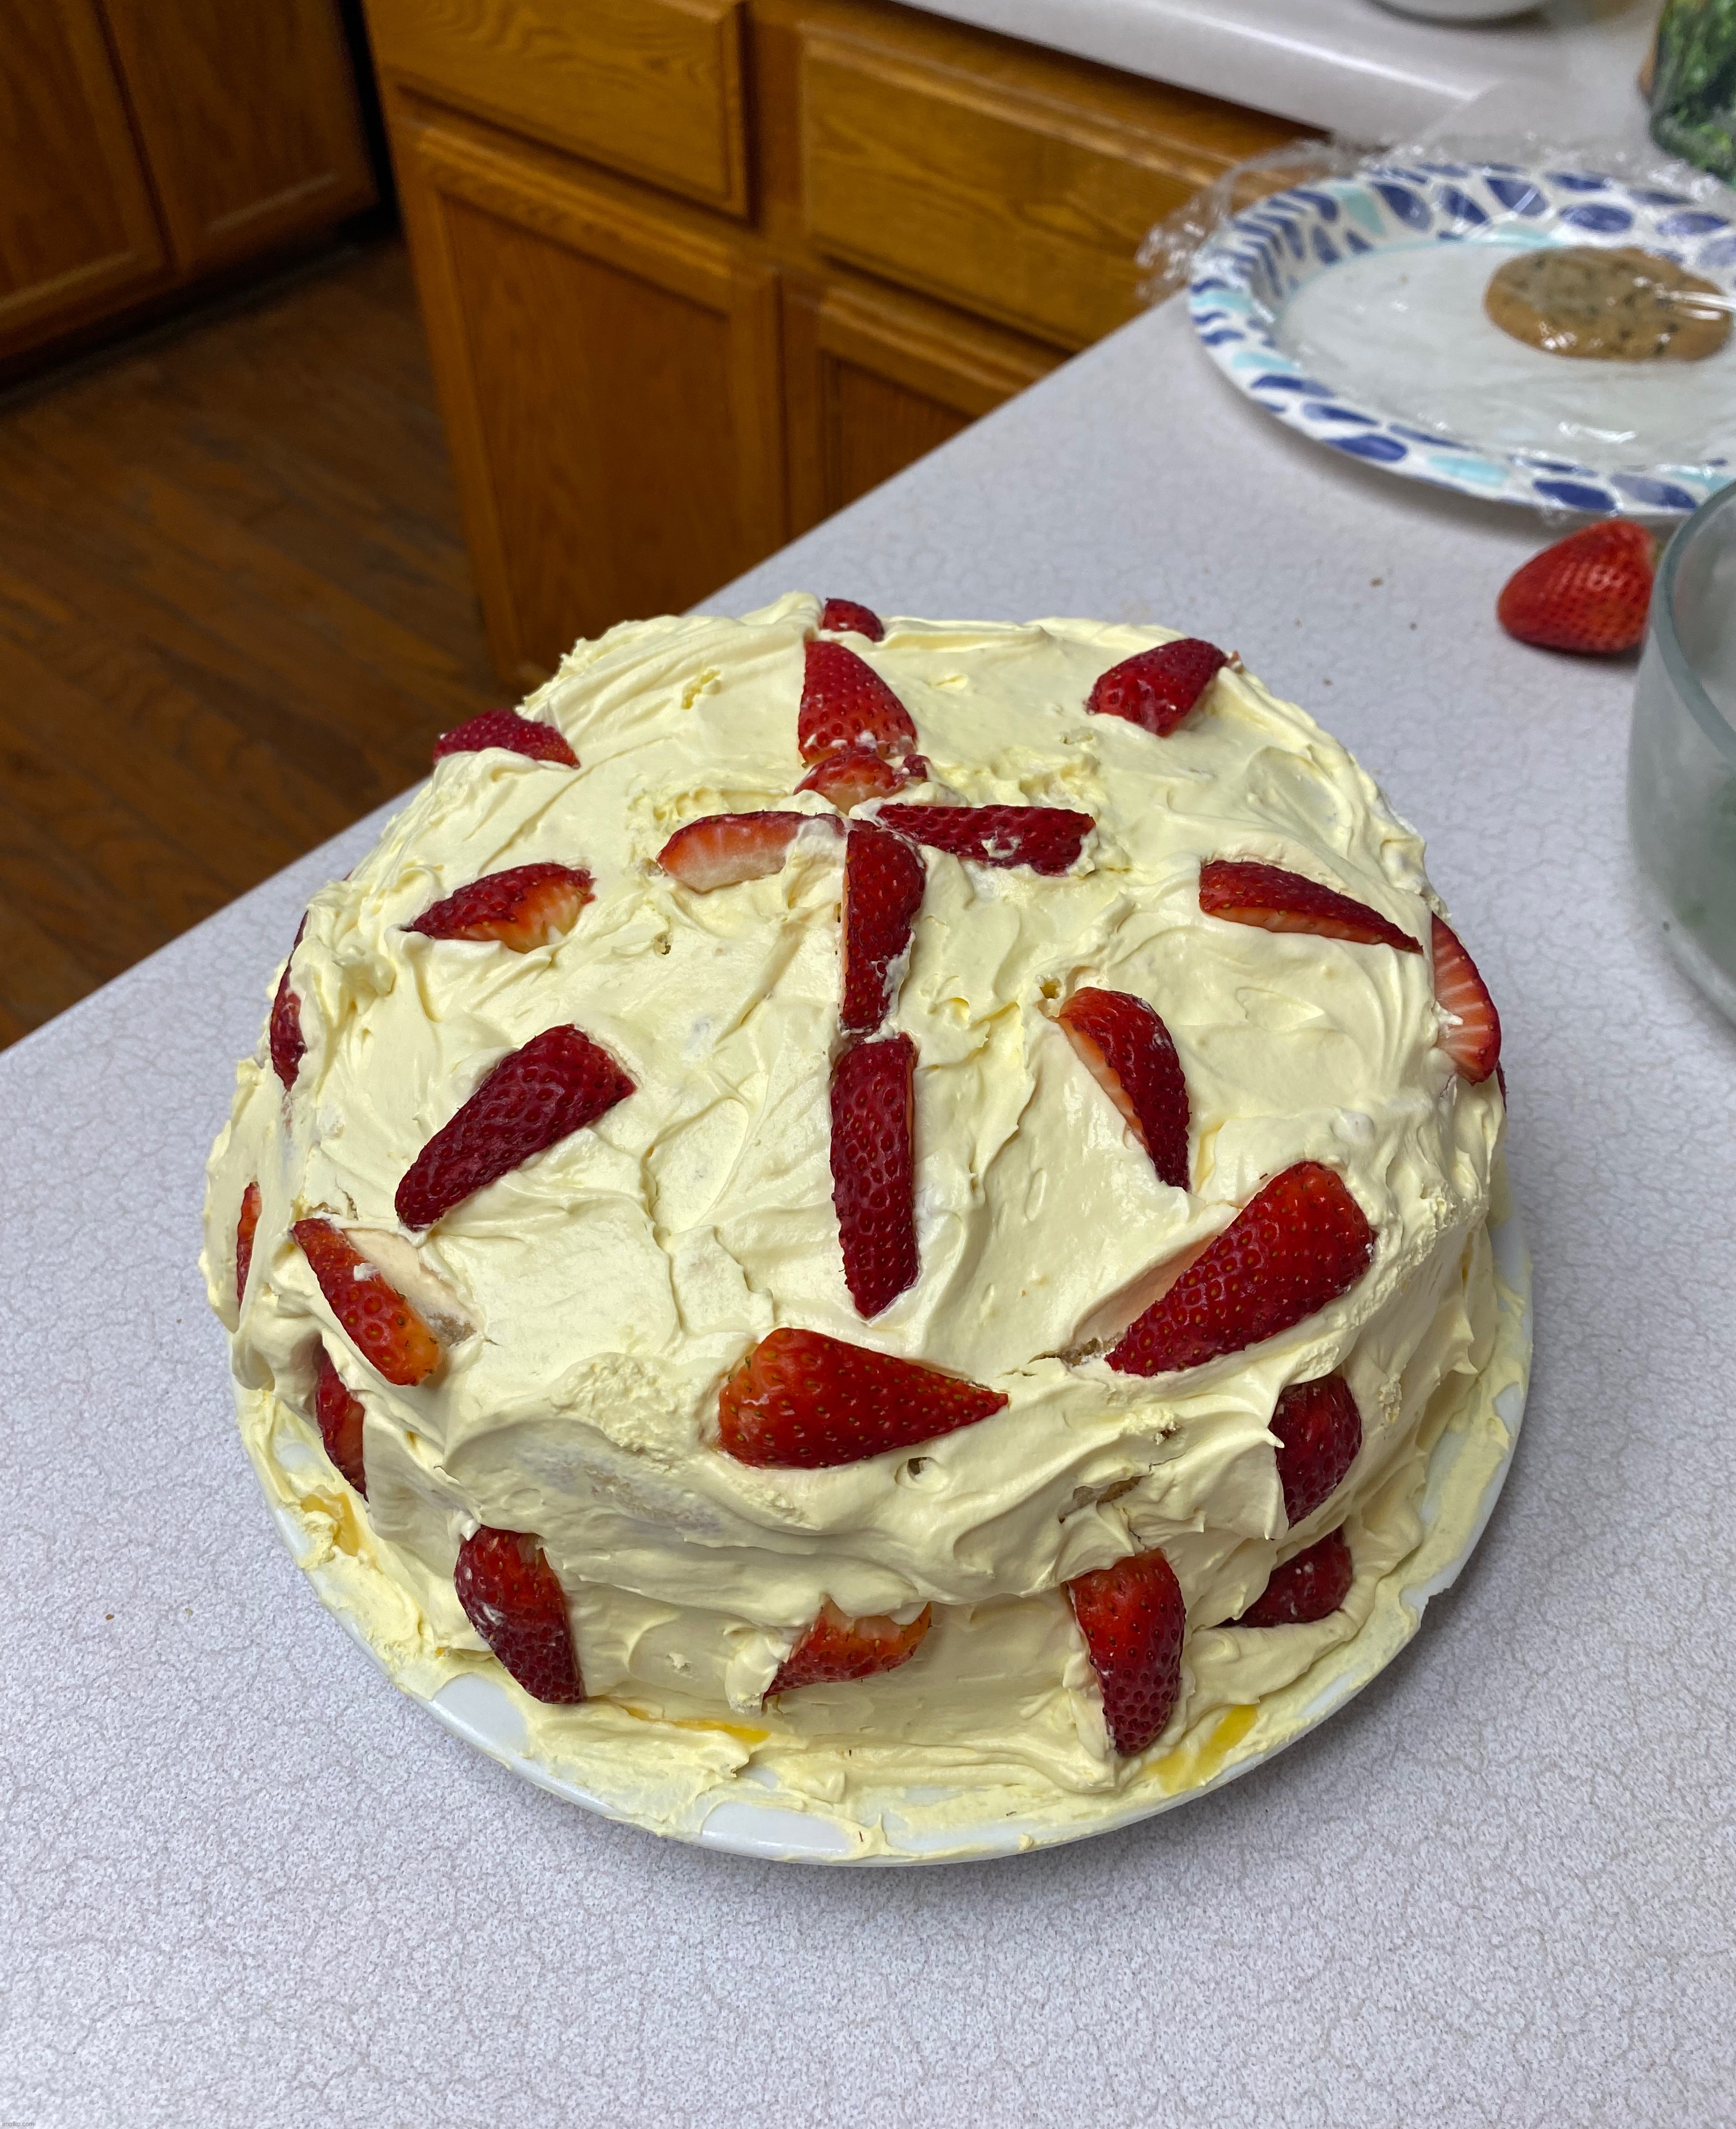 Cake for Easter I made :) | image tagged in picture,cake,easter | made w/ Imgflip meme maker